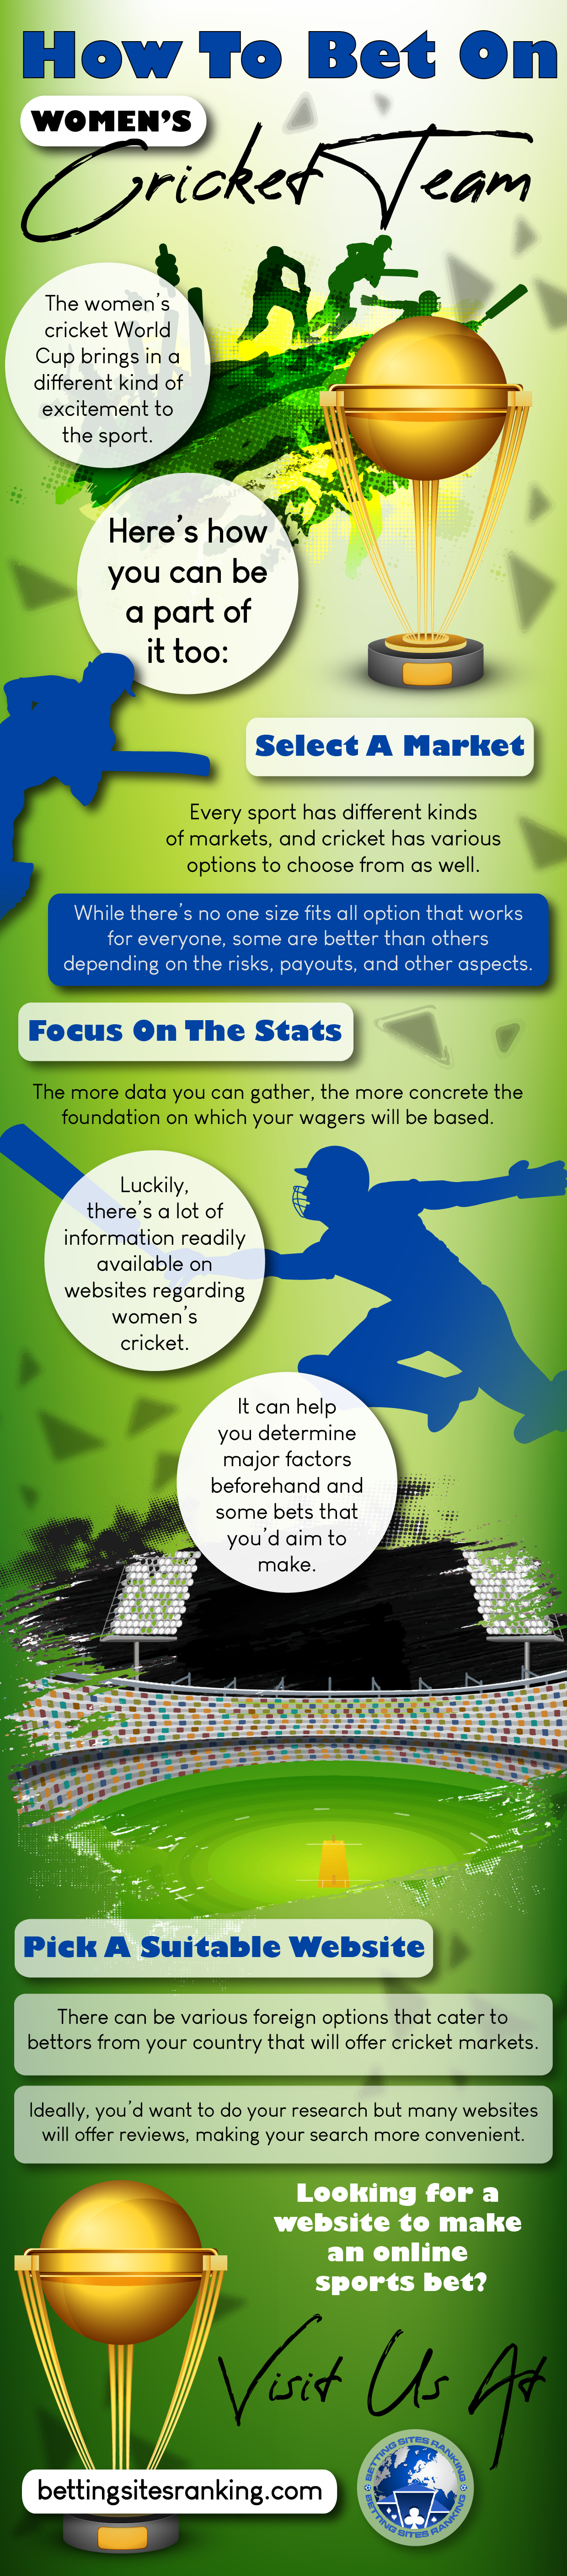 How-to-bet-on-womens-cricket-team